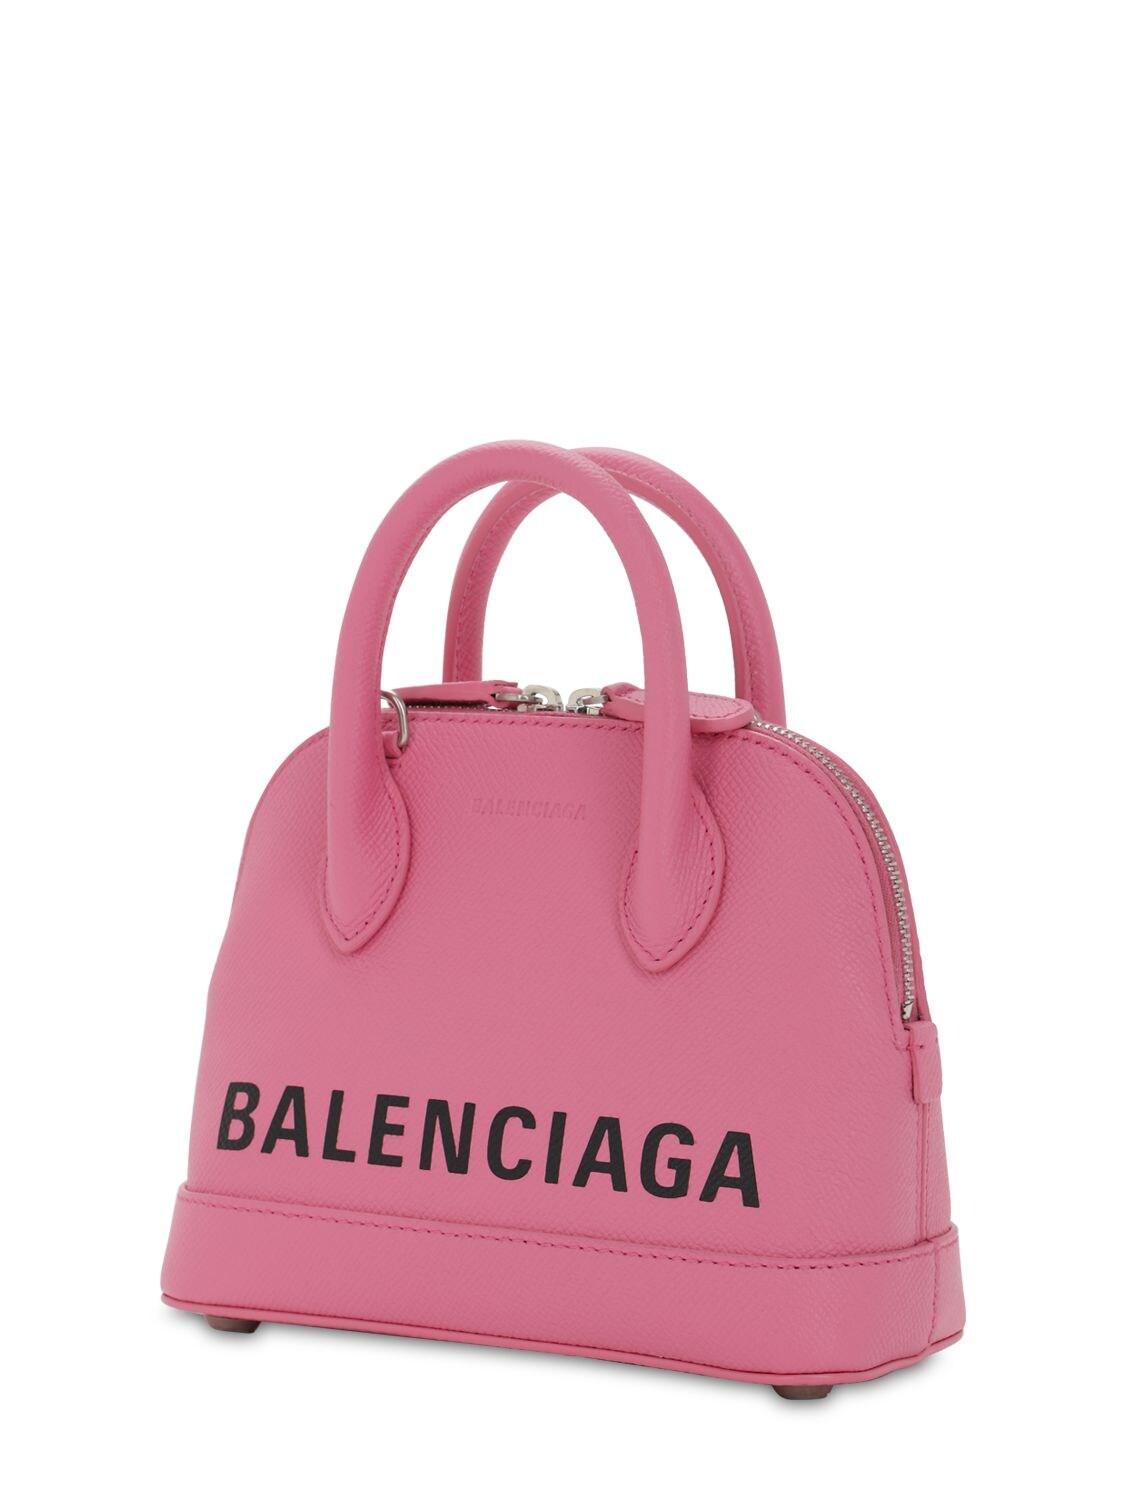 Balenciaga Xxs Ville Leather Top Handle Bag in Pink | Lyst